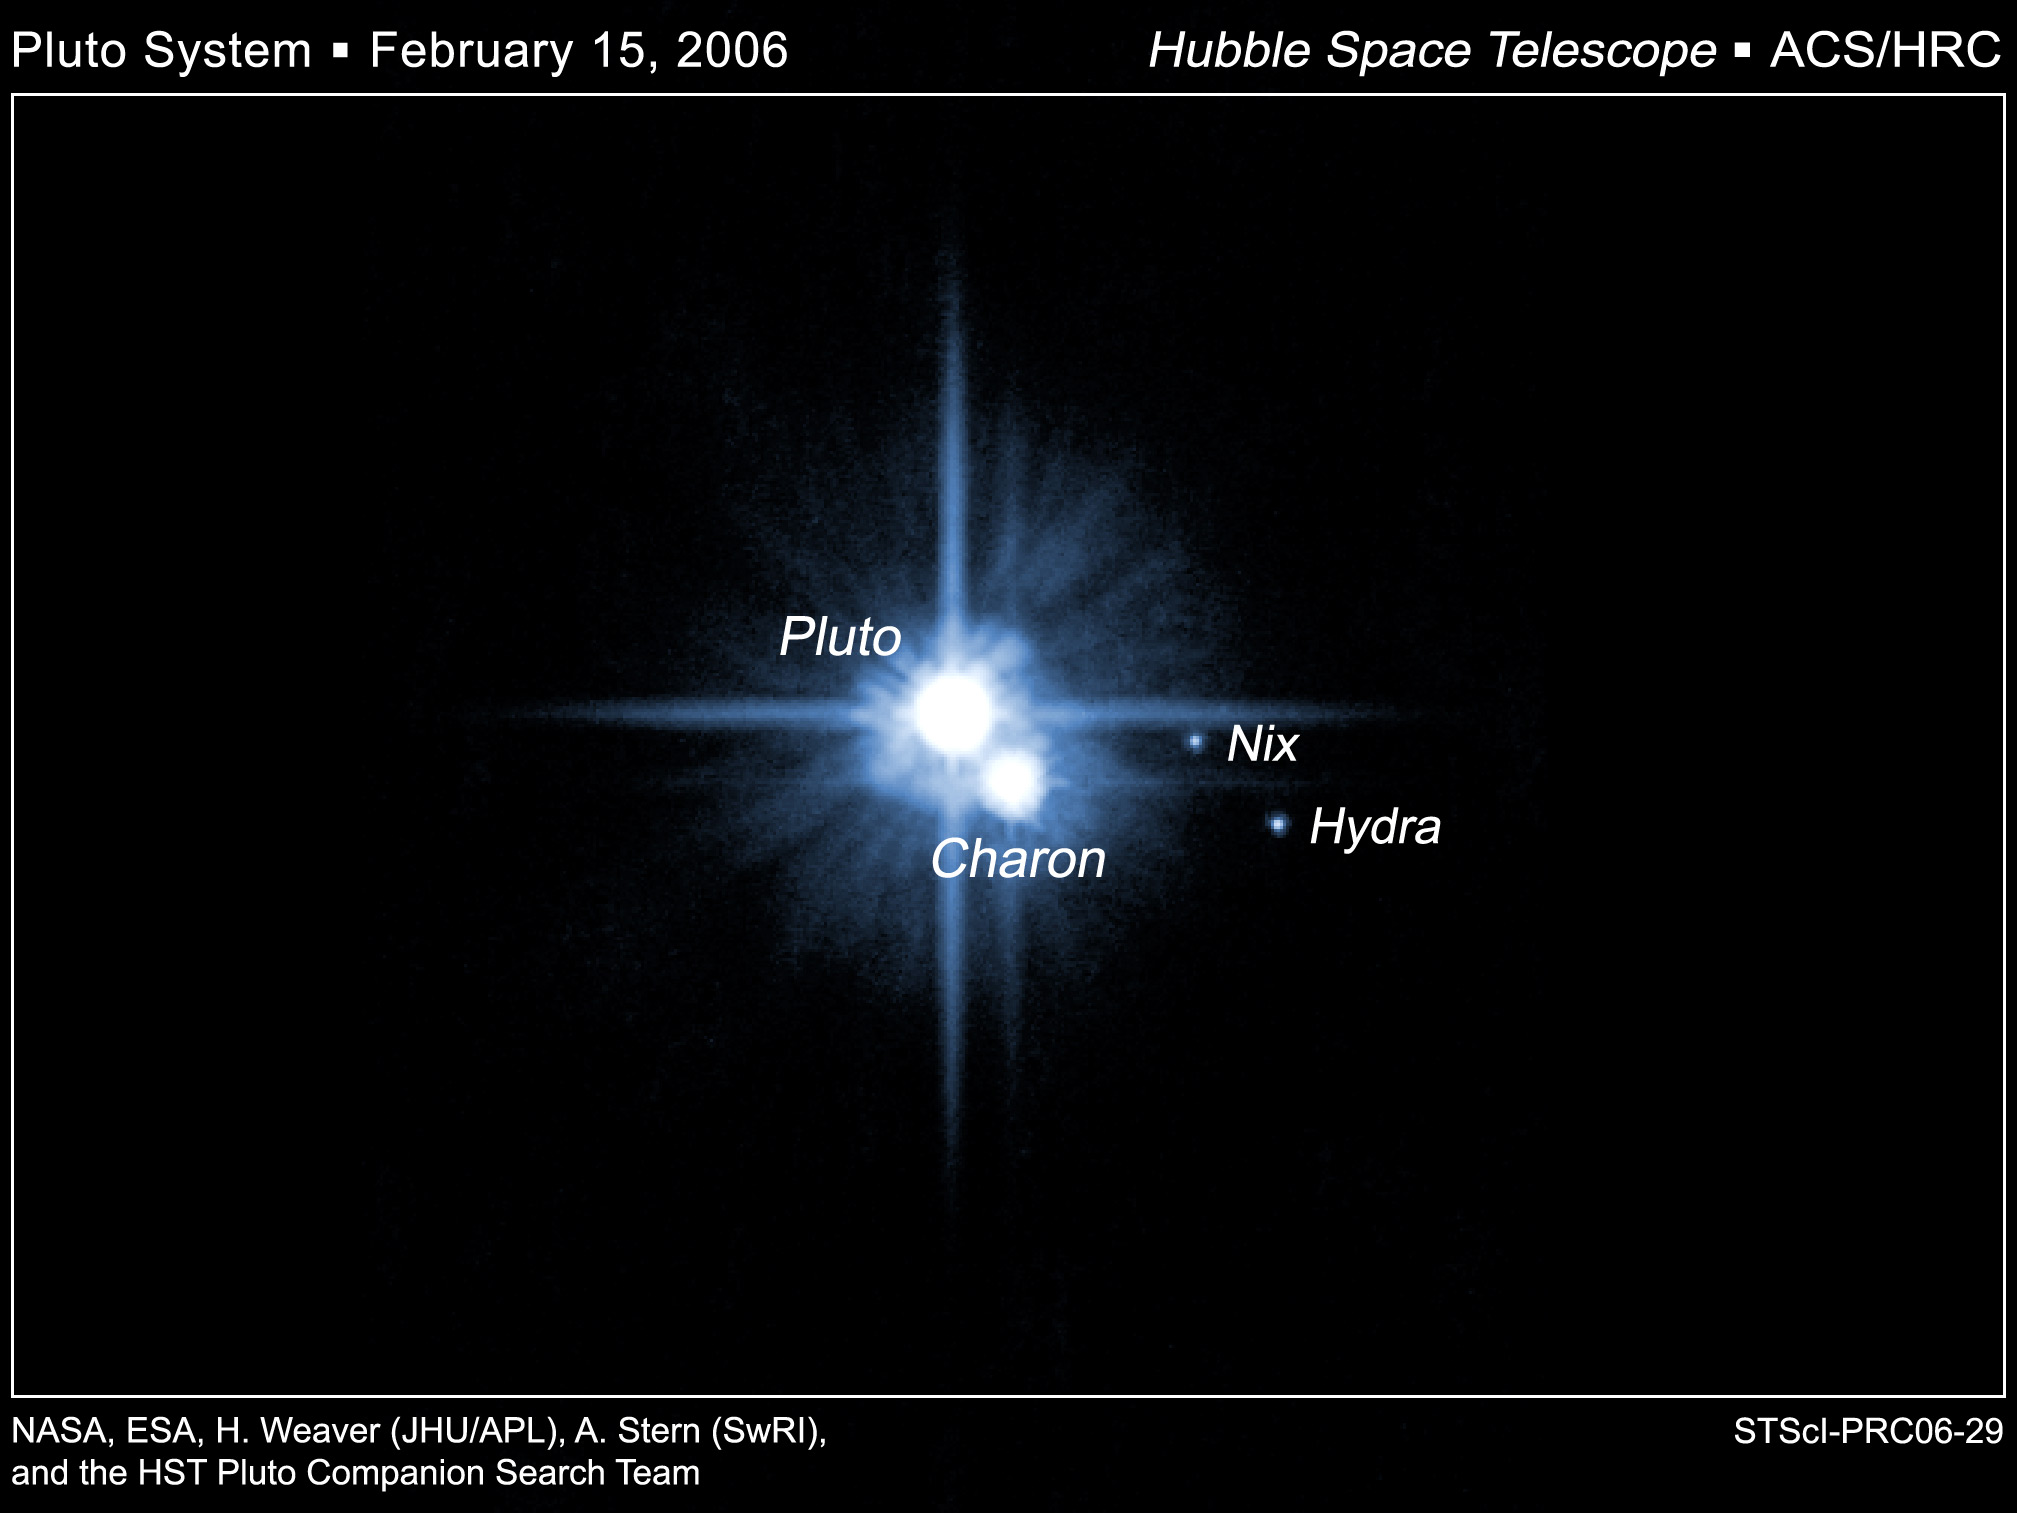 A pair of small moons that NASA's Hubble Space Telescope discovered orbiting Pluto now have official names: Nix and Hydra.